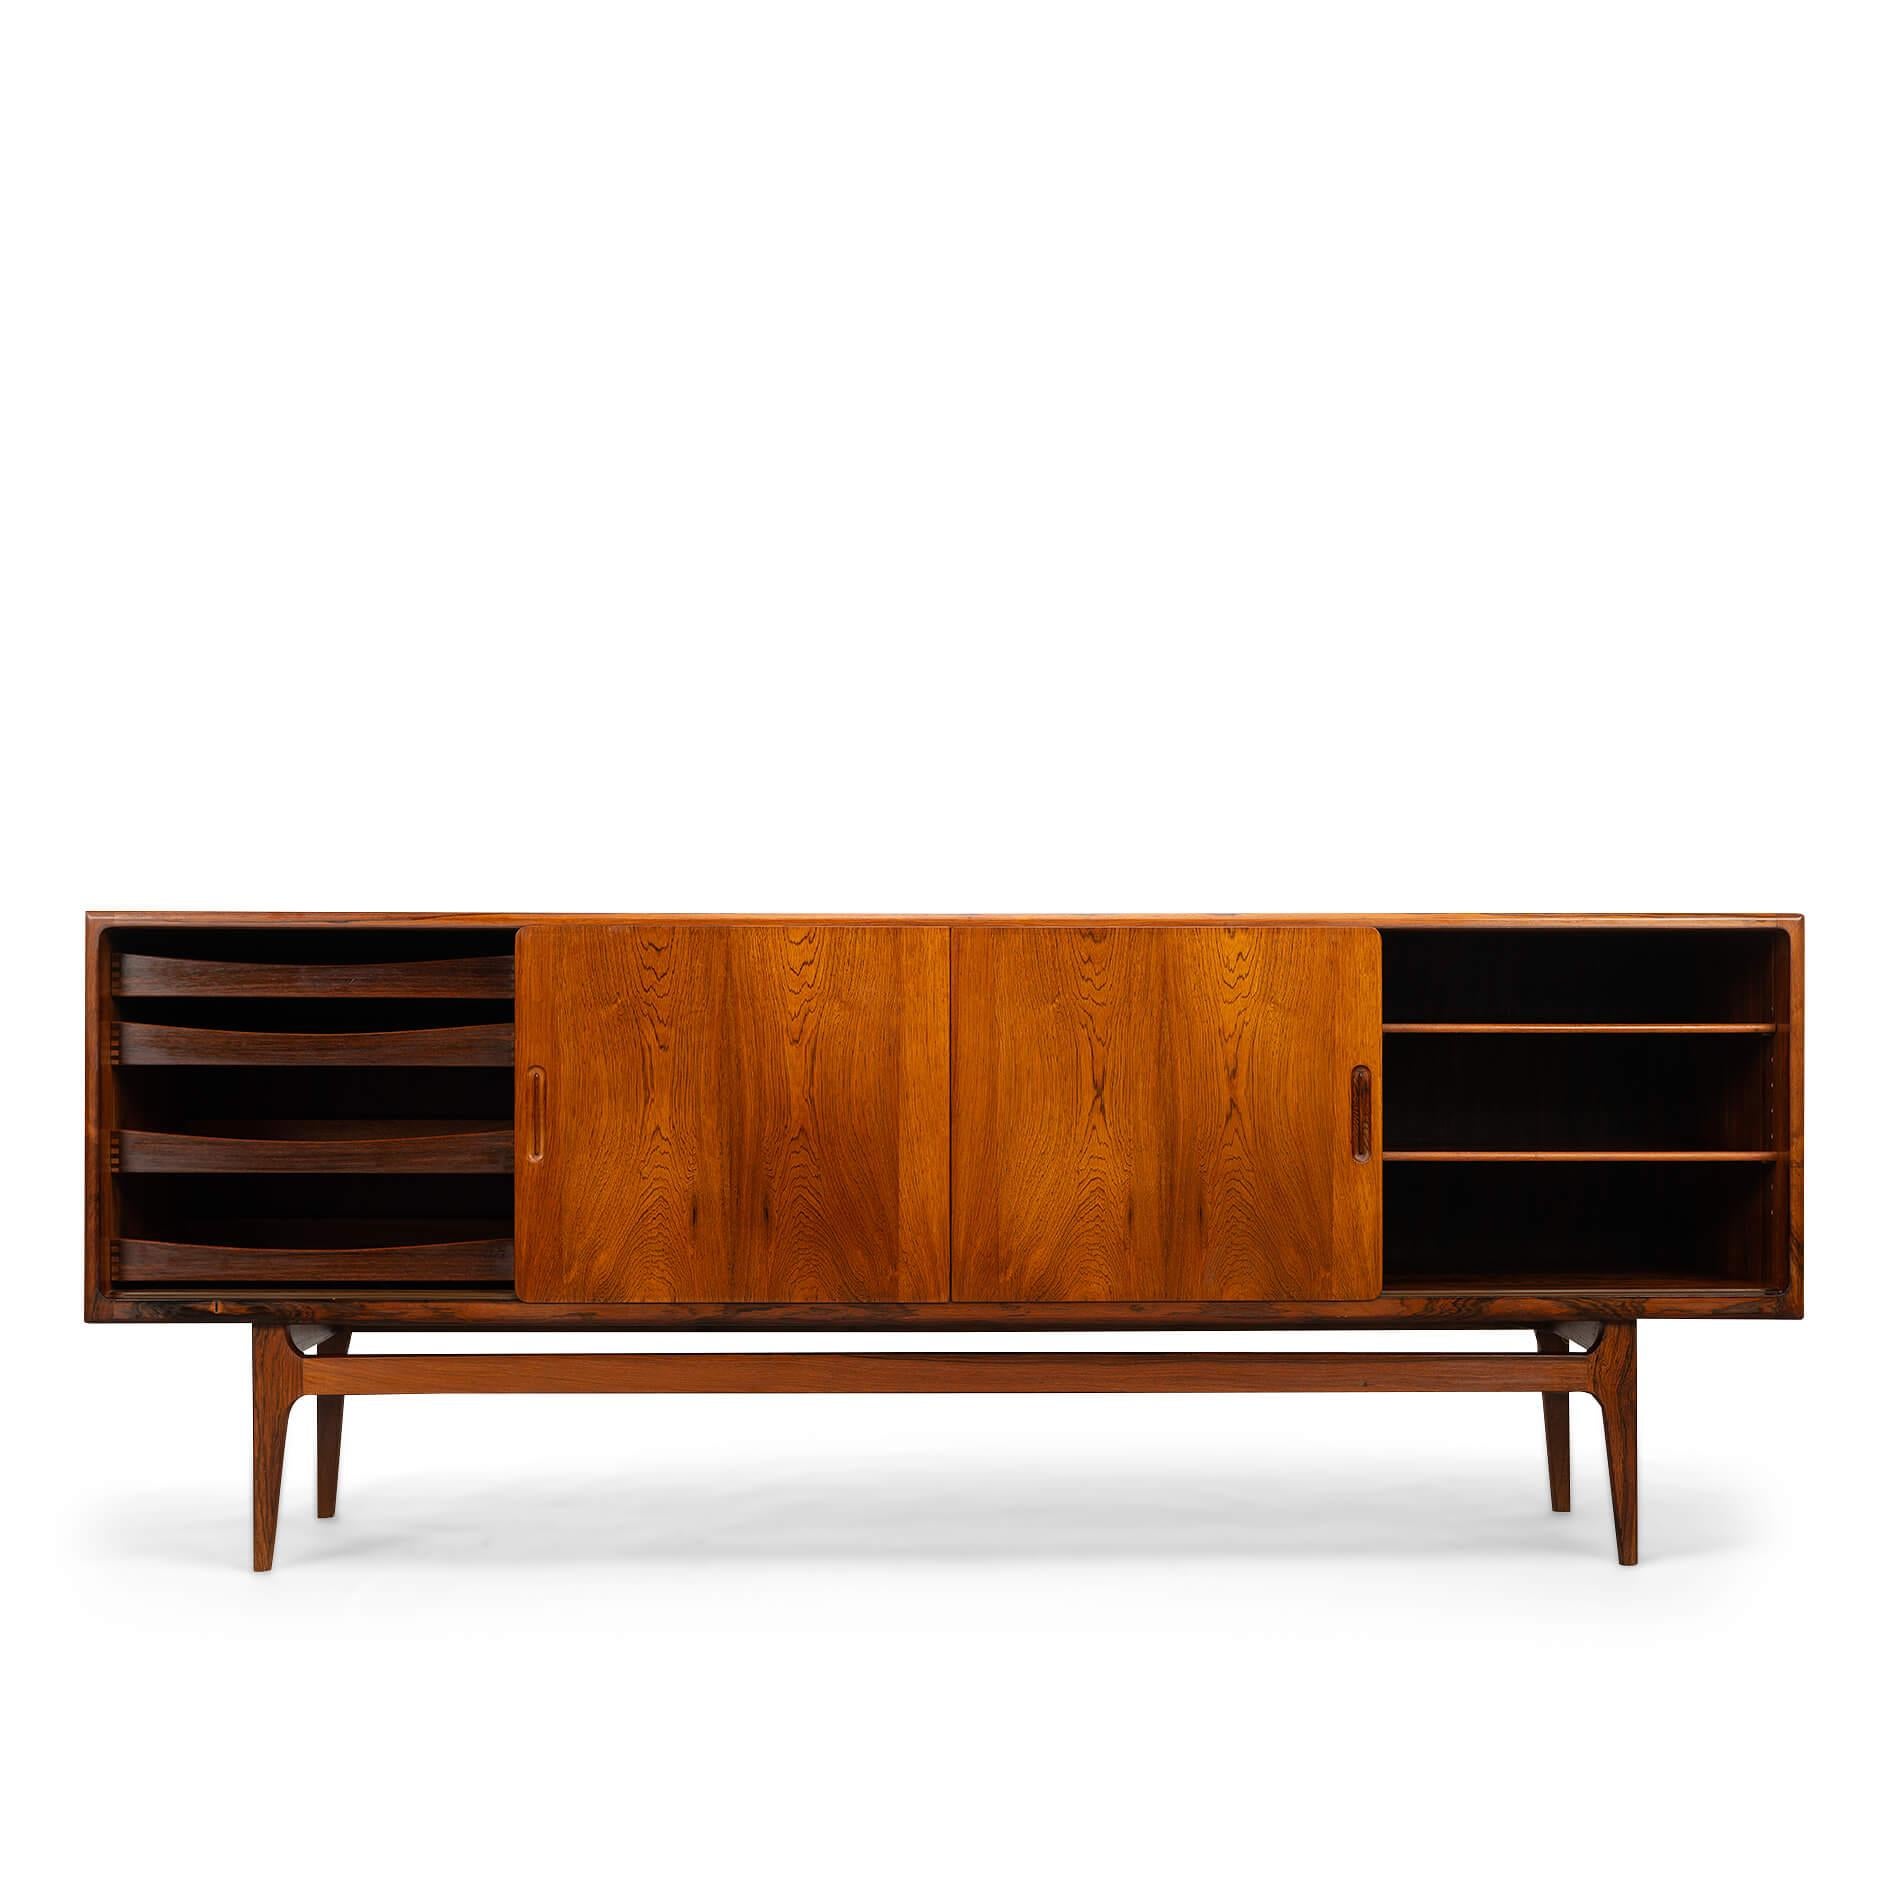 Danish design sleek Mid-Century Modern design! The cabinet has a beautiful subtle drawing of the rosewood or rosewood veneer. It's what we call a low sideboard. The print is the same on all doors. We also see handles that subtly disappear.